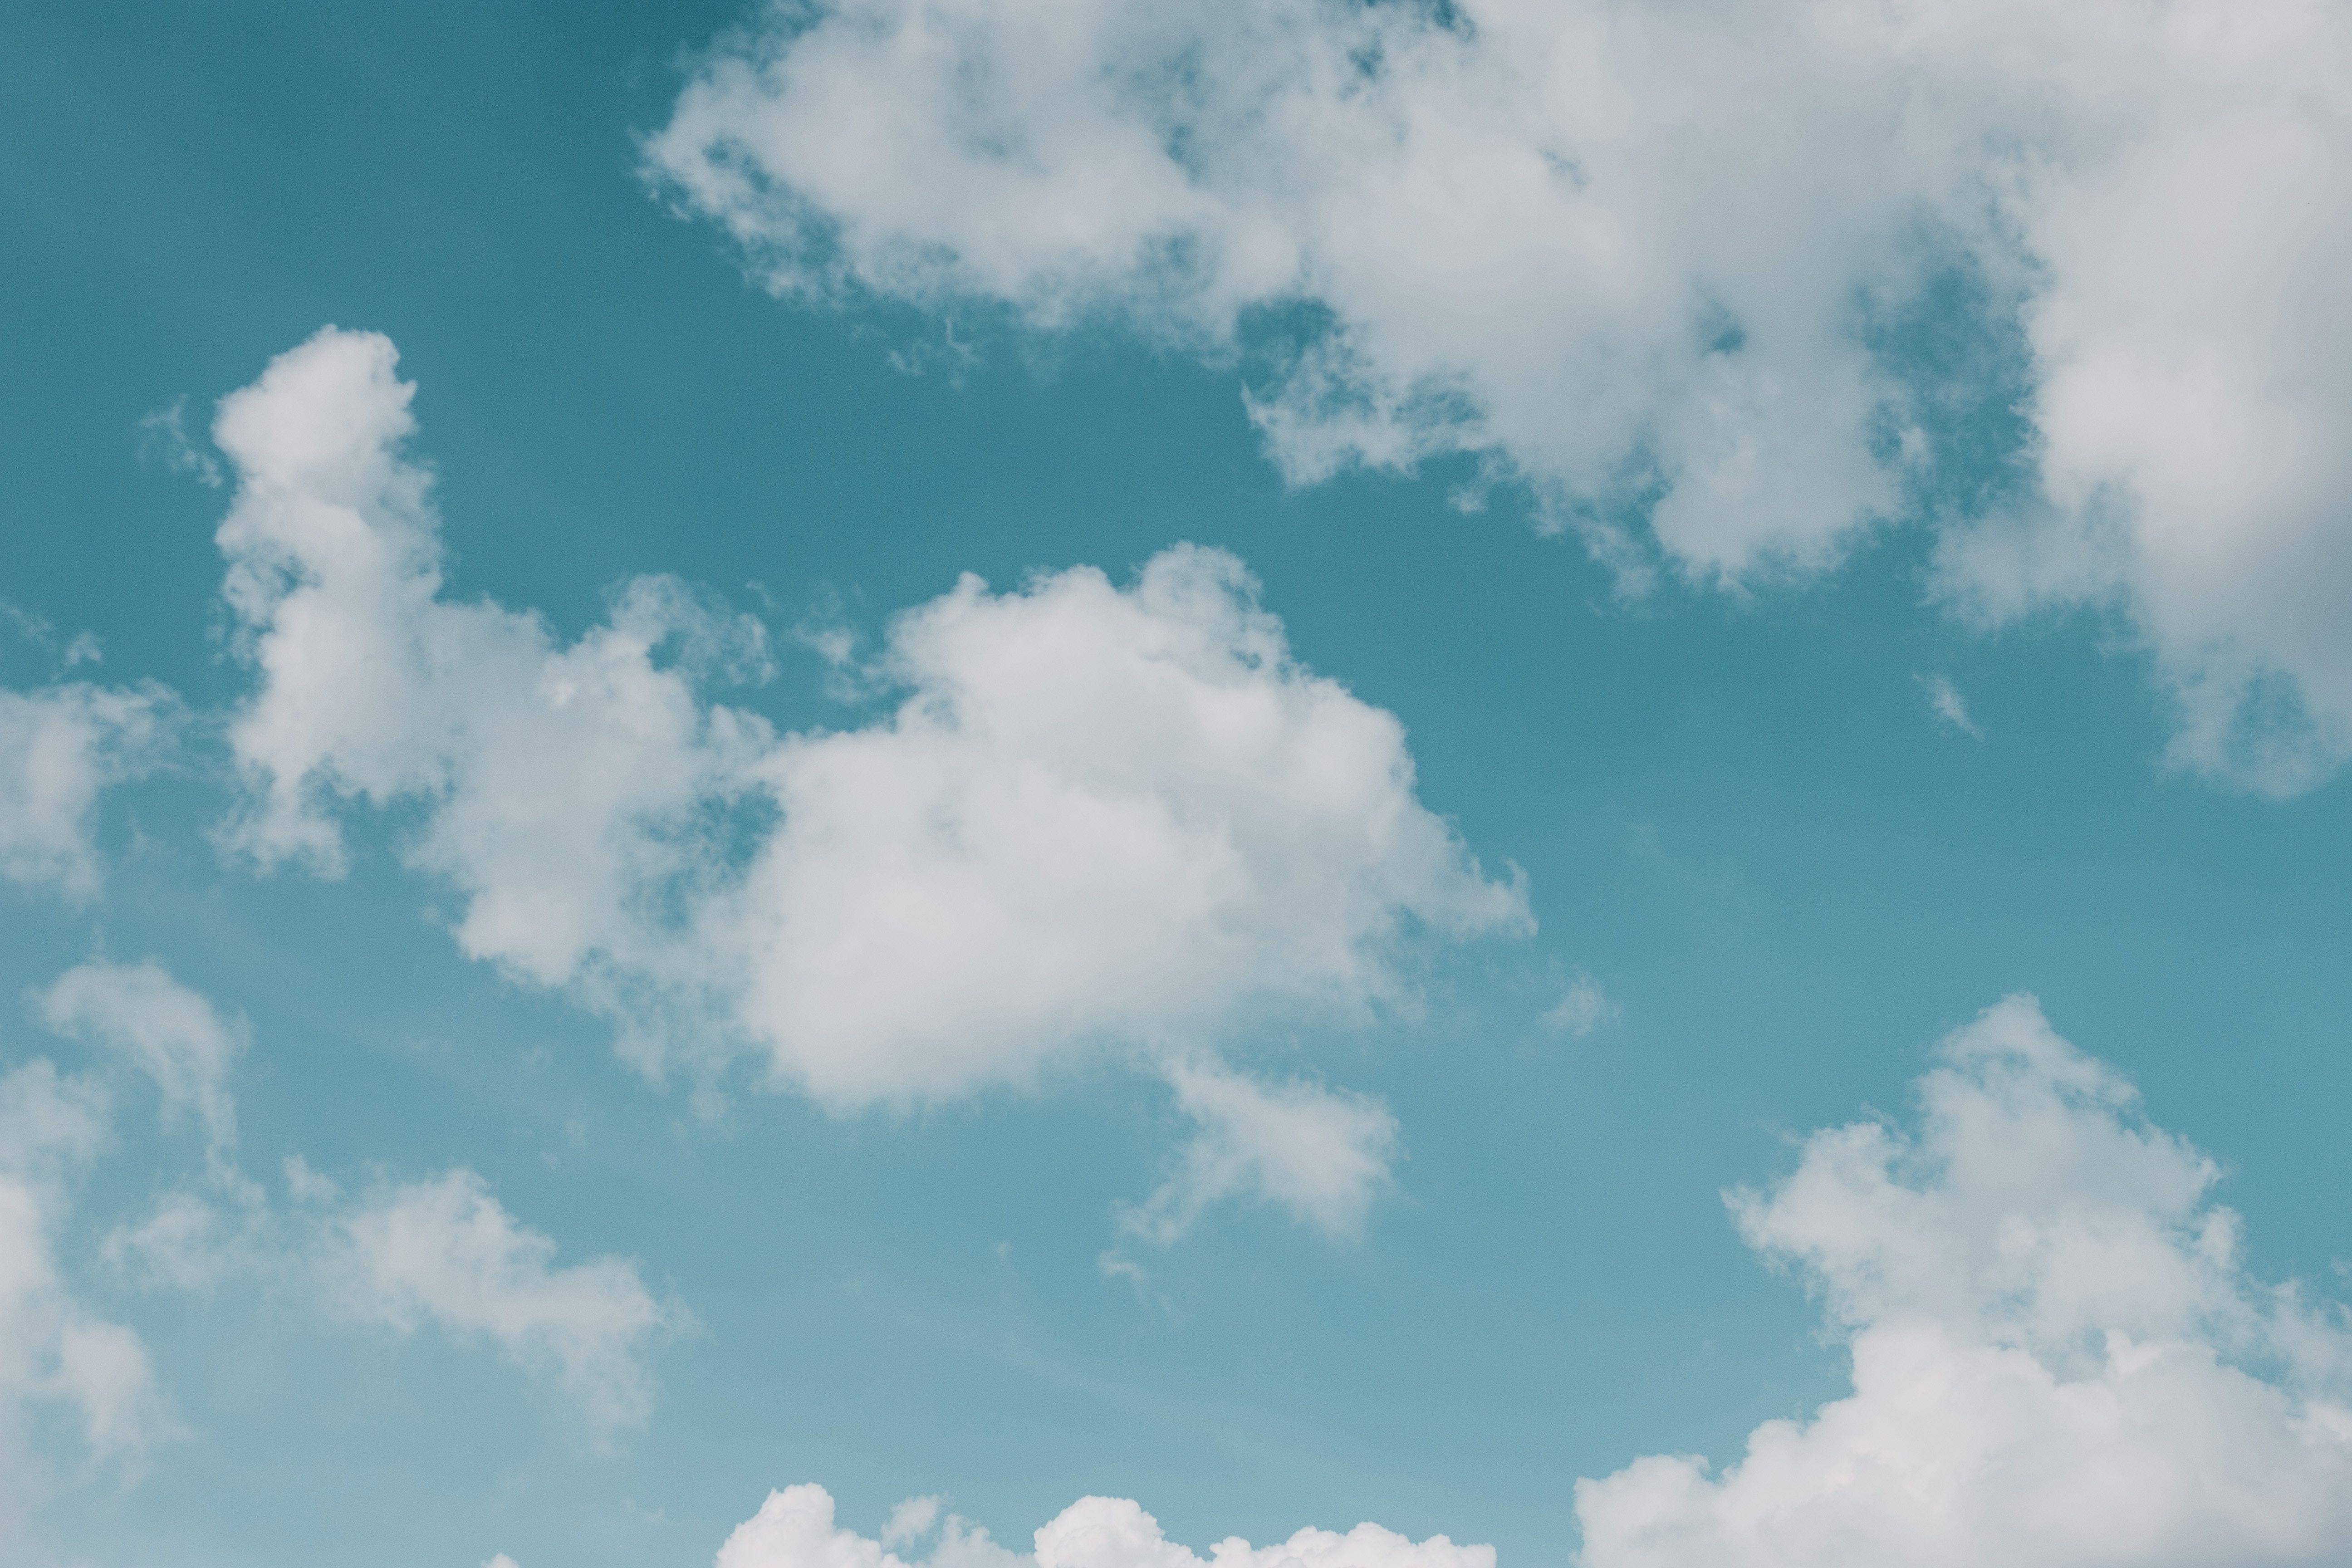 5184x3456 Public domain image, minimal, cool background, minimalistic, wallpaper, free, landscape, cool wallpaper, nature, cloudscape, photo, minimalism, minimalist, chill, sky, traveling, blue sky, cloud, texture, summer, blue Gallery